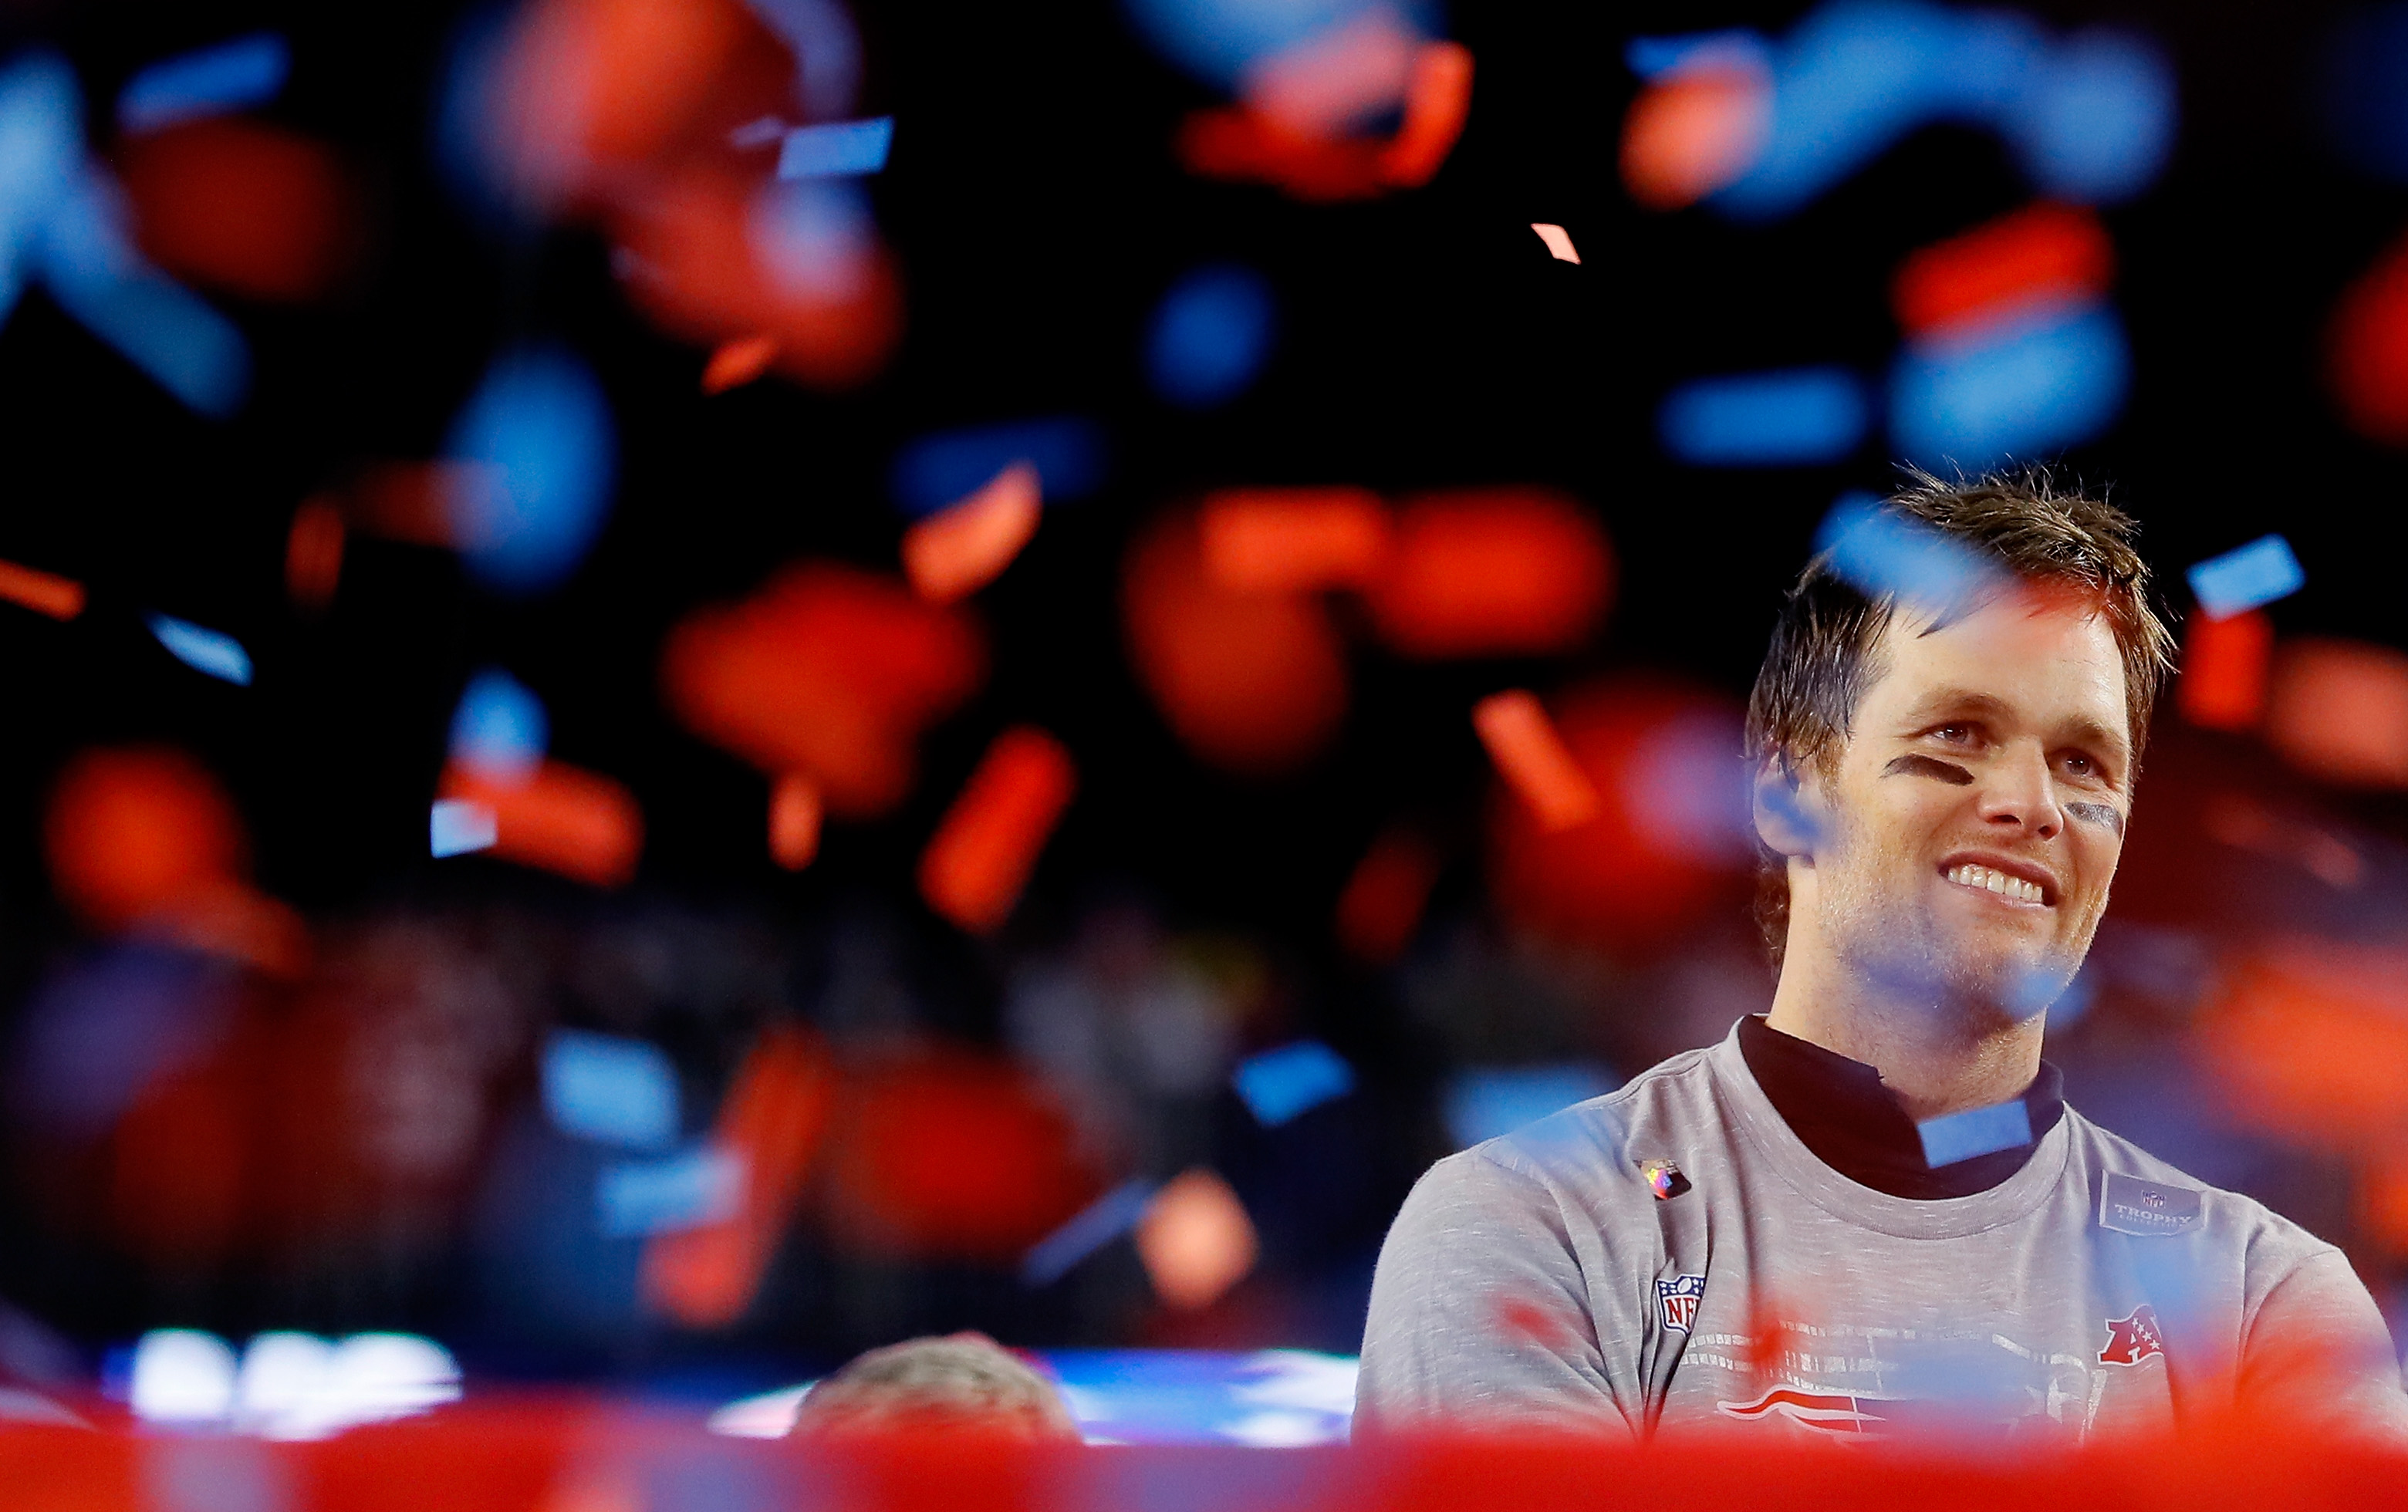 Here’s How Much Tom Brady Will Make at the Super Bowl—Even If He Loses